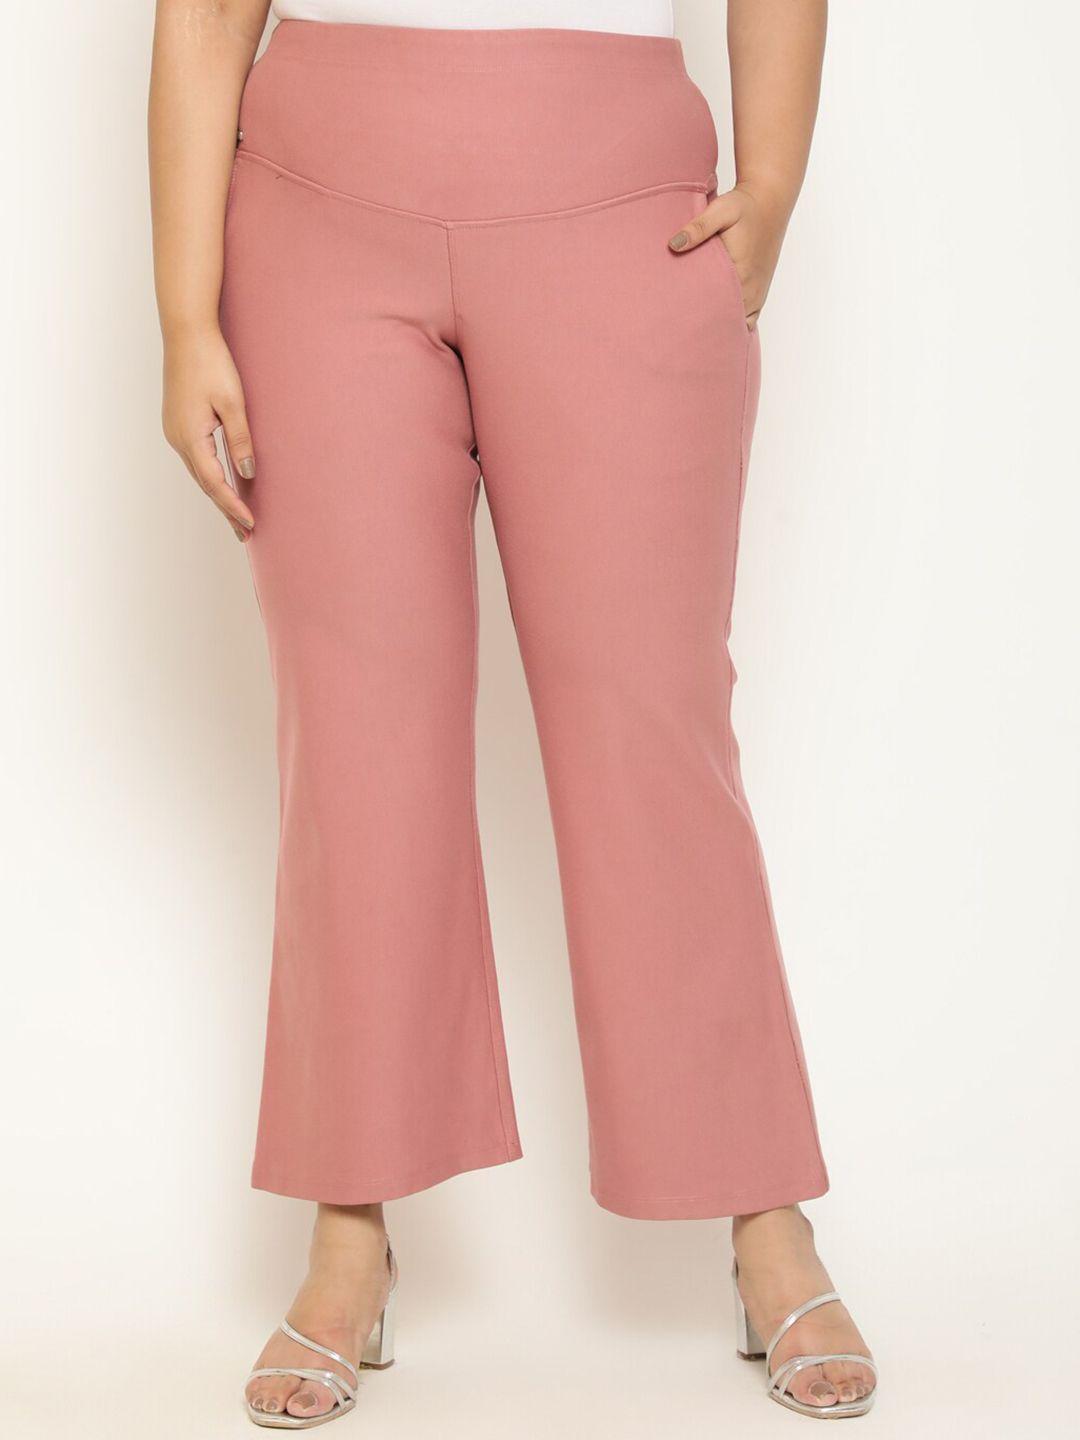 amydus-women-plus-size-flared-high-rise-bootcut-trousers